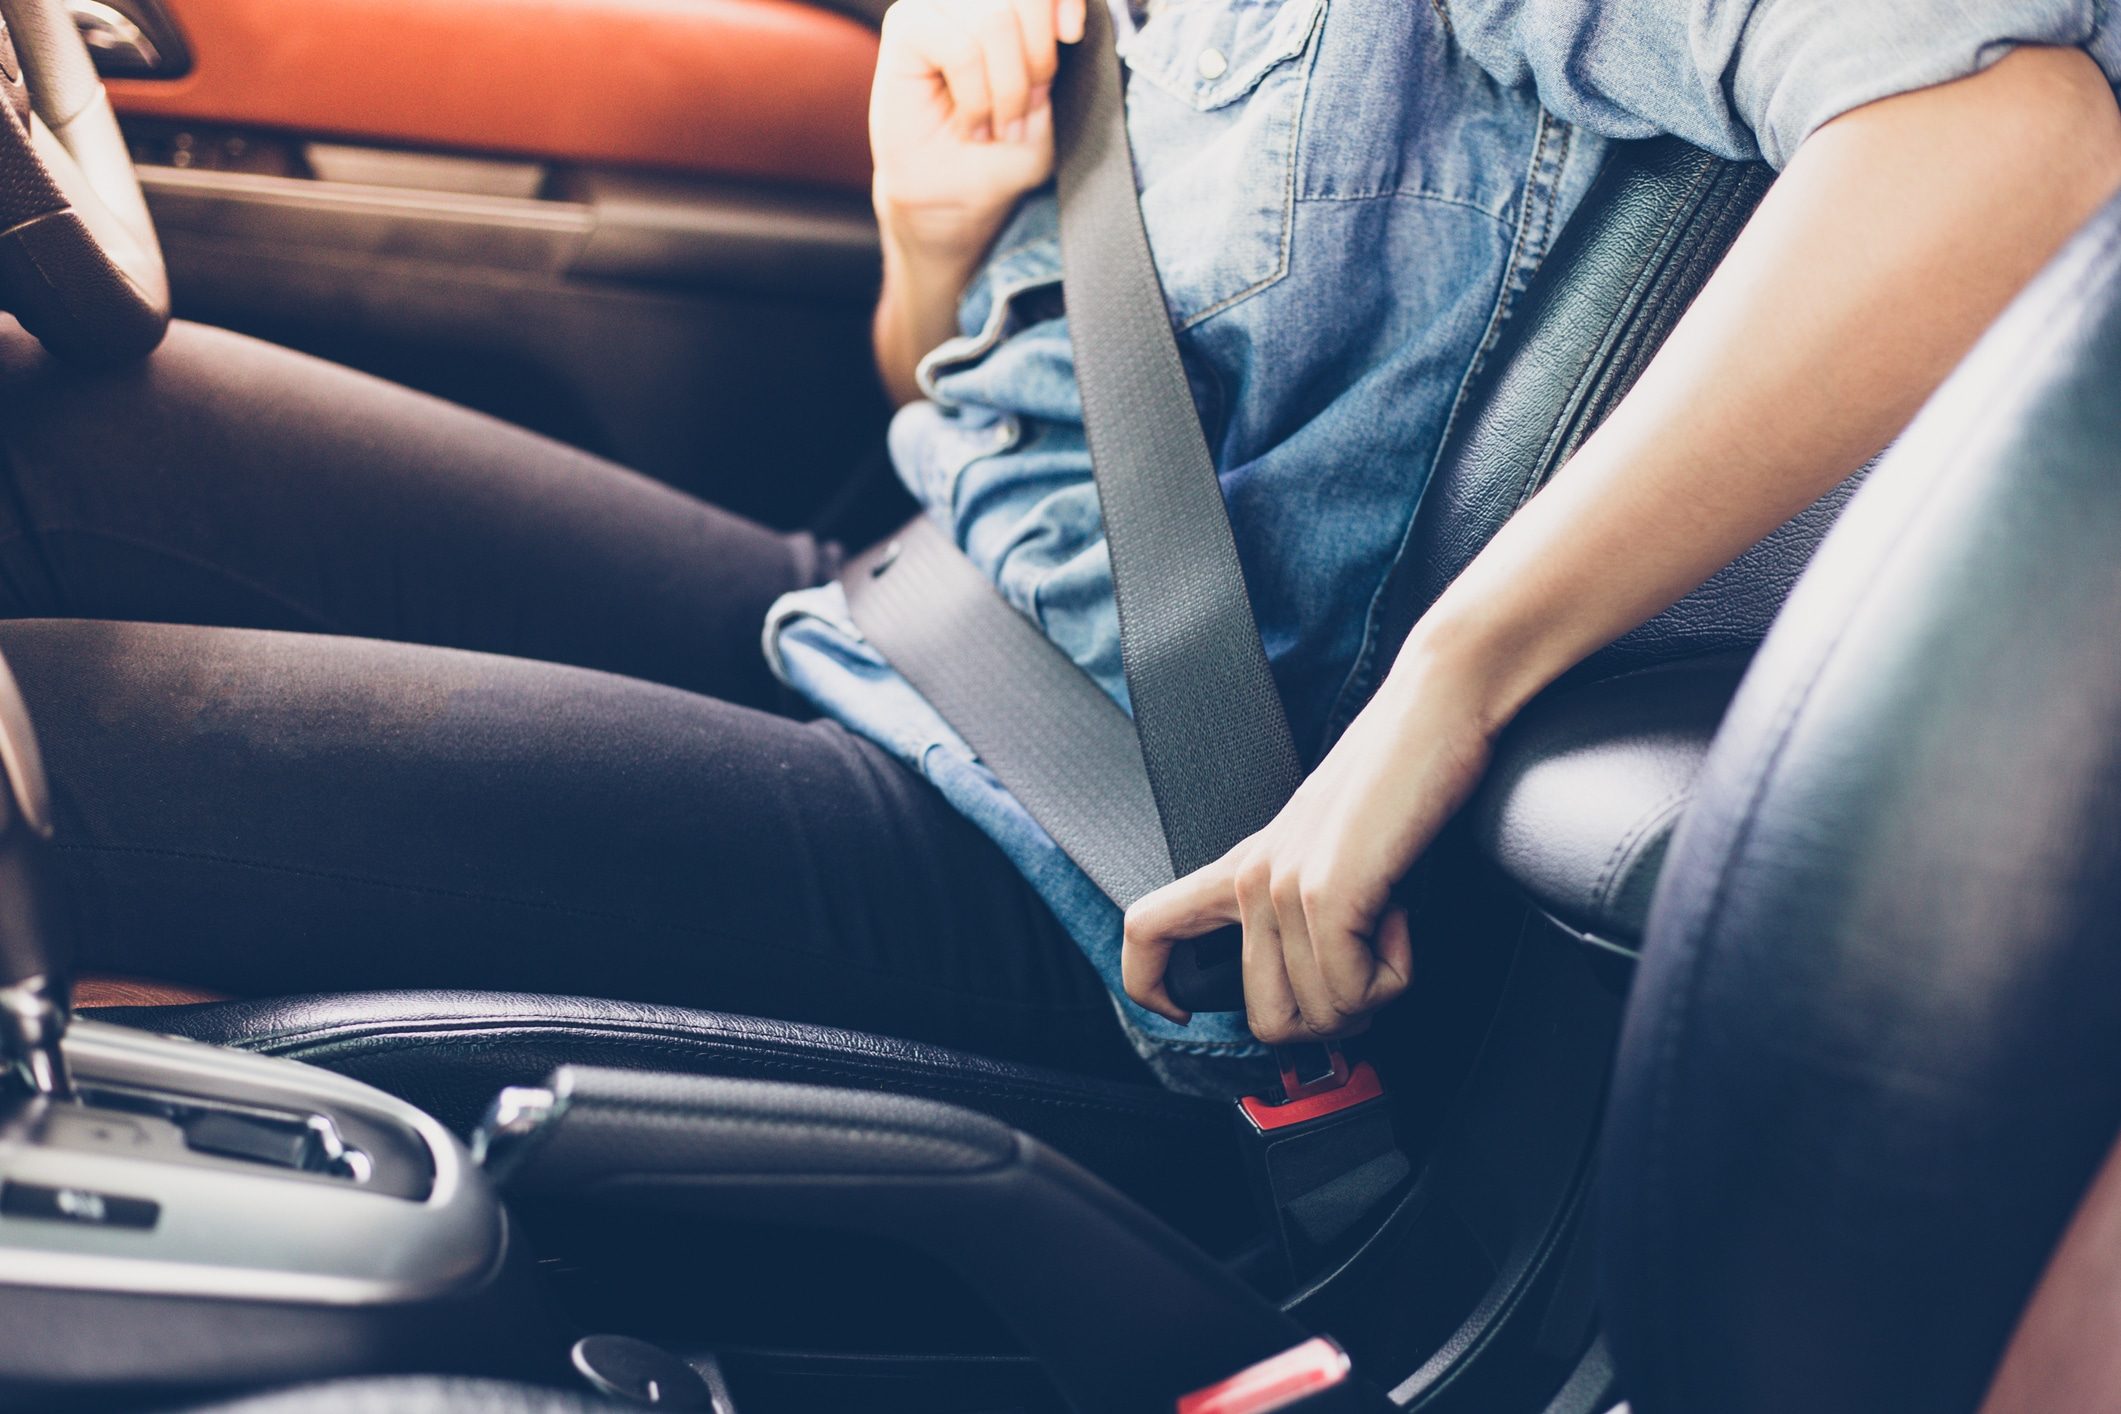 What If My Seat Belt Fails During a Crash?